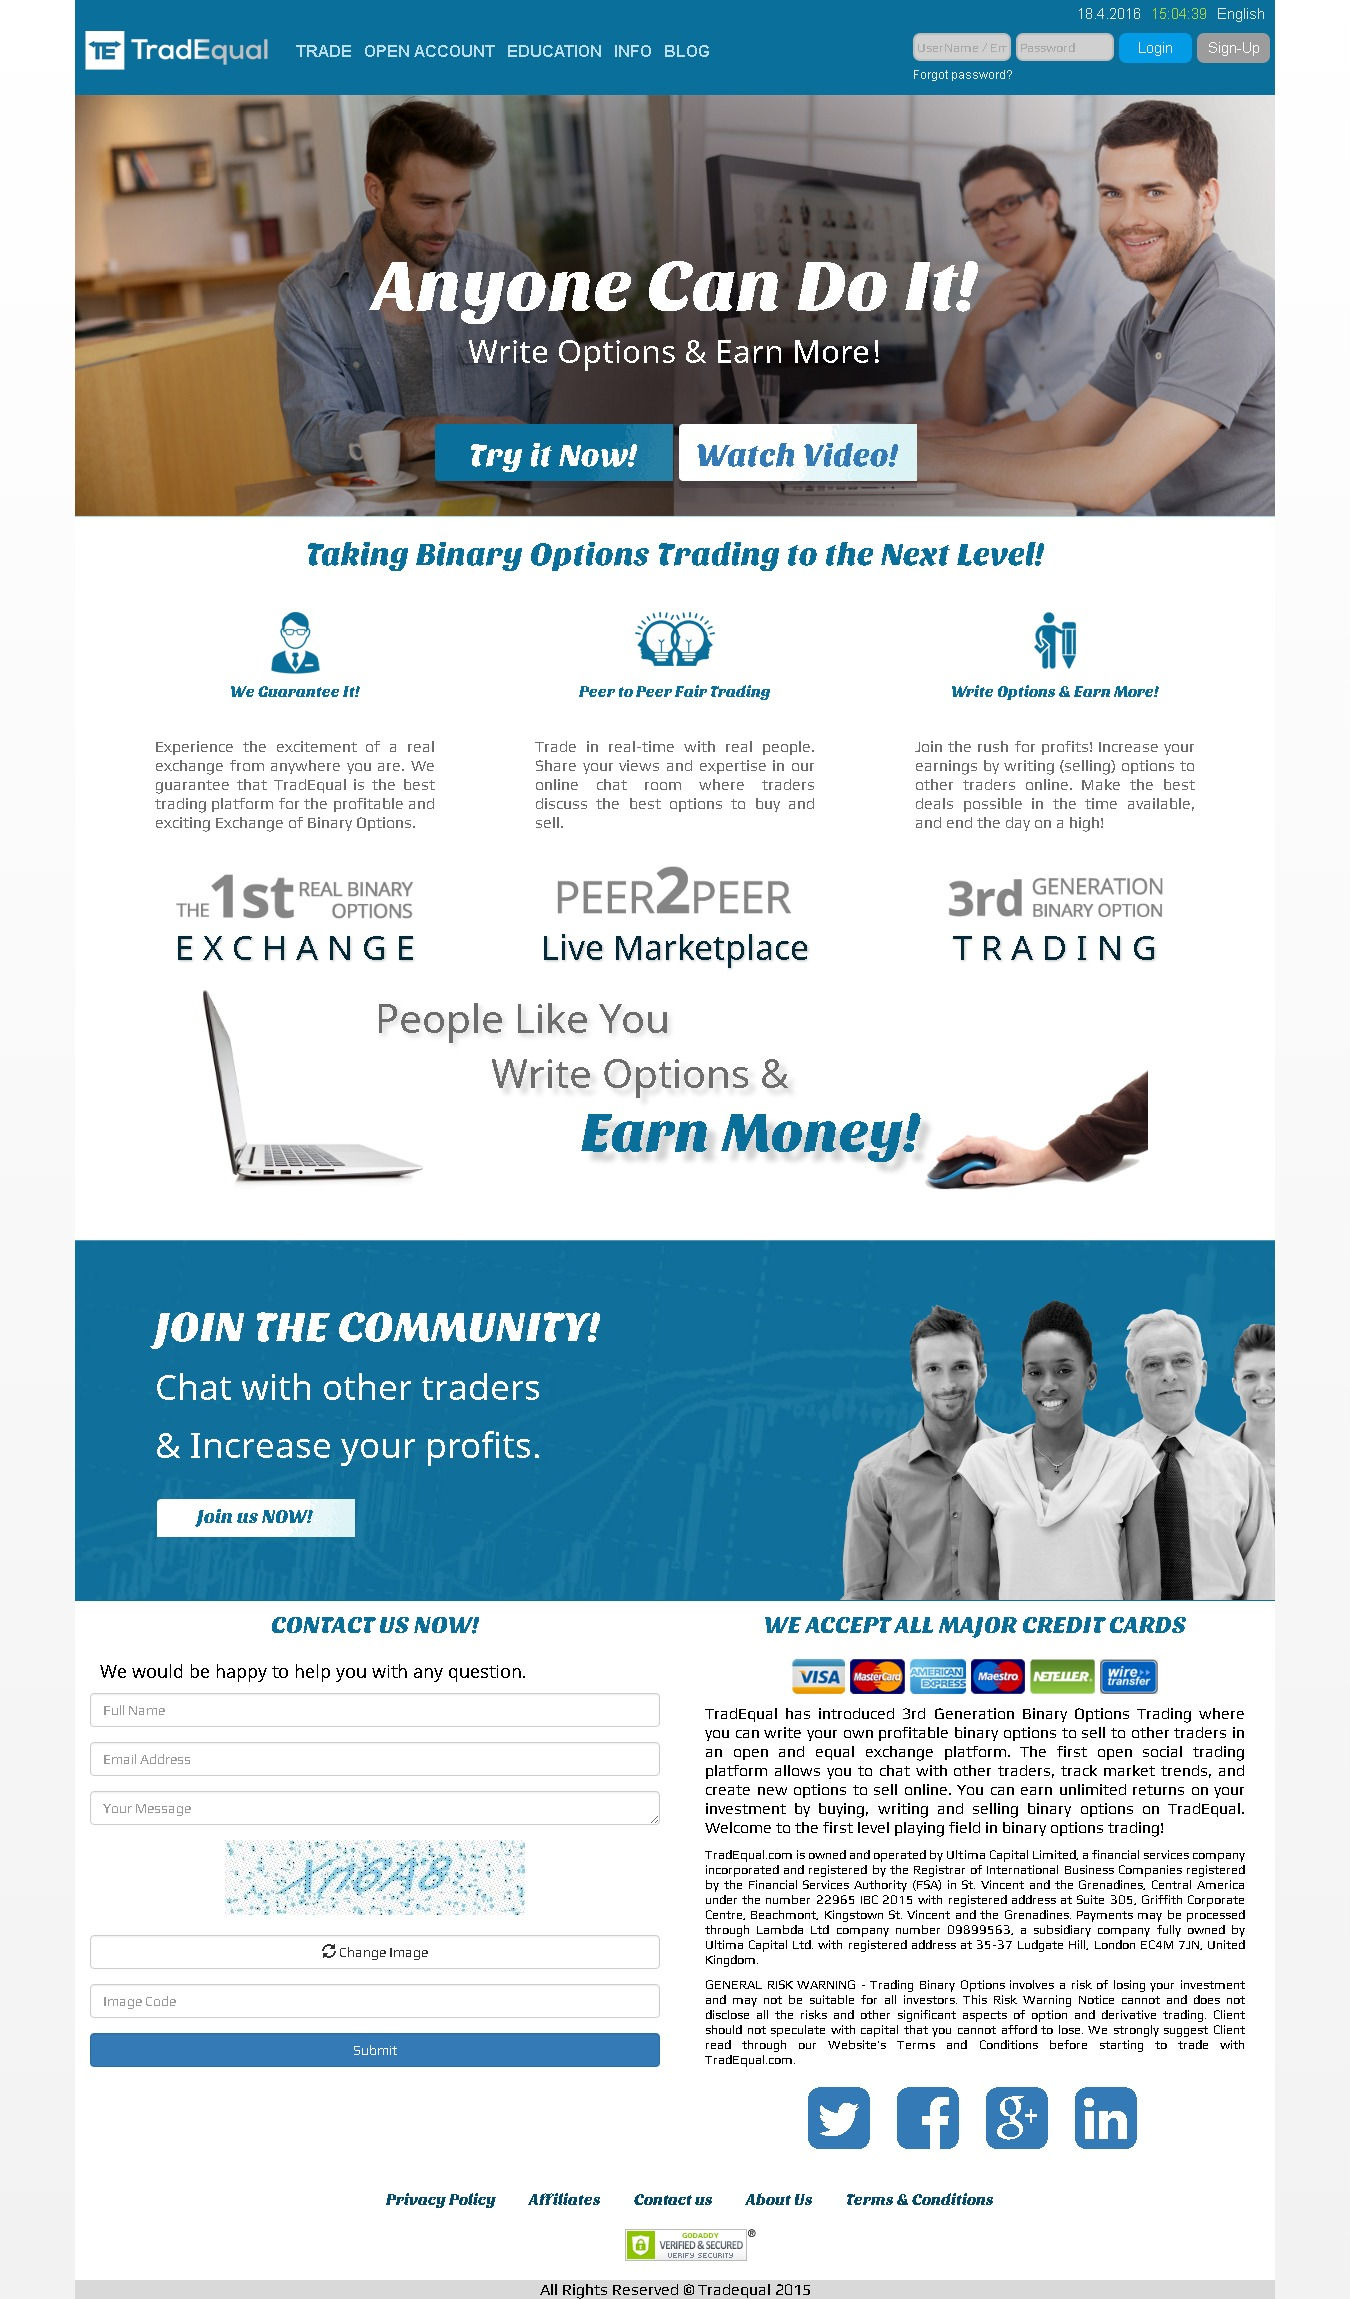 Are binary options regulated by the fsa